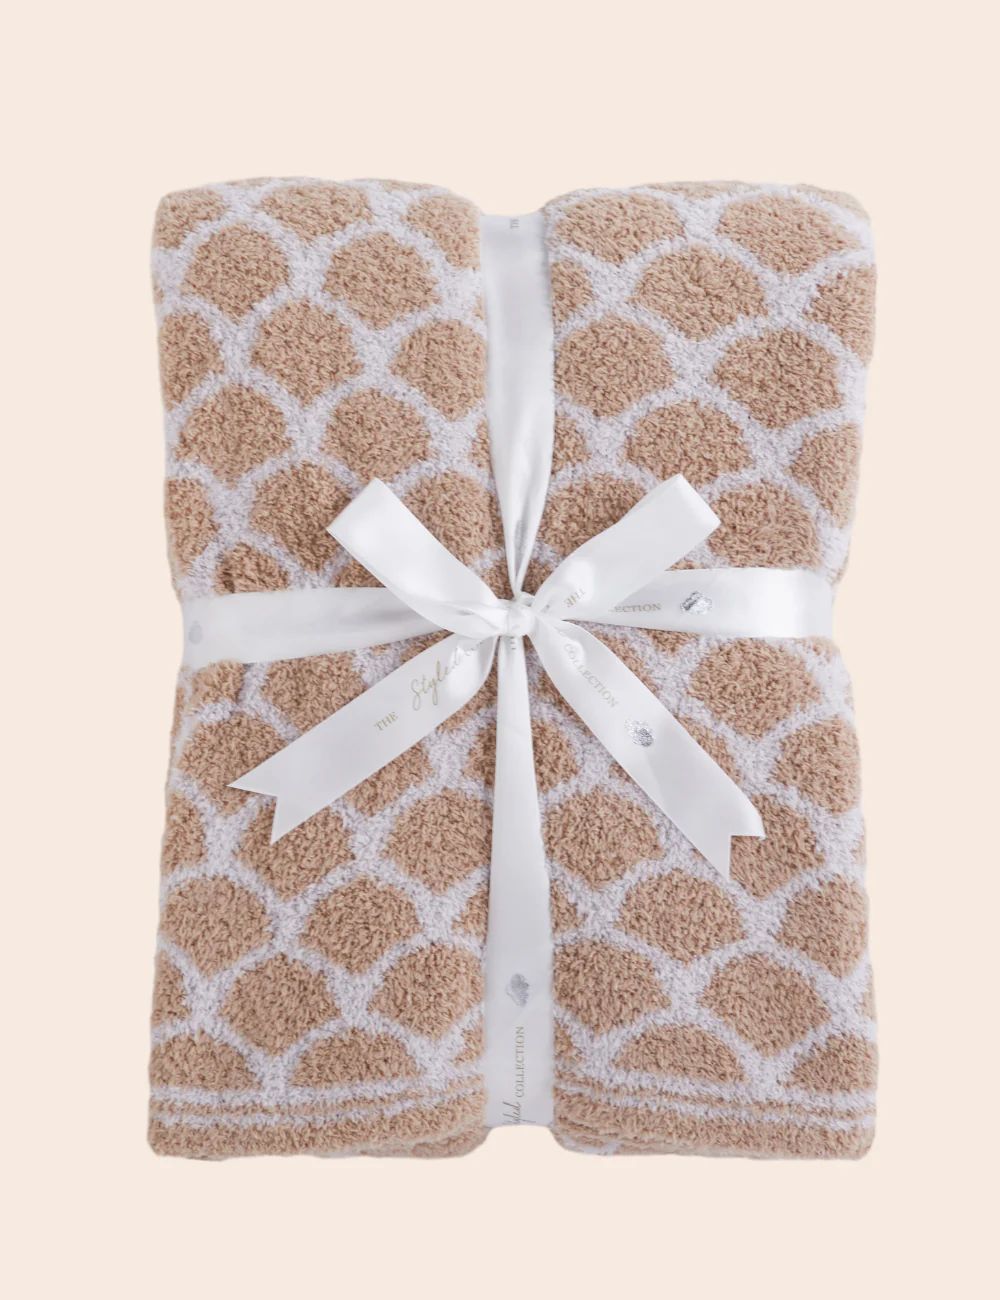 TSC X Madi Nelson: Gingerbread House Buttery Blanket- Pre-Order 11-30 or sooner | The Styled Collection